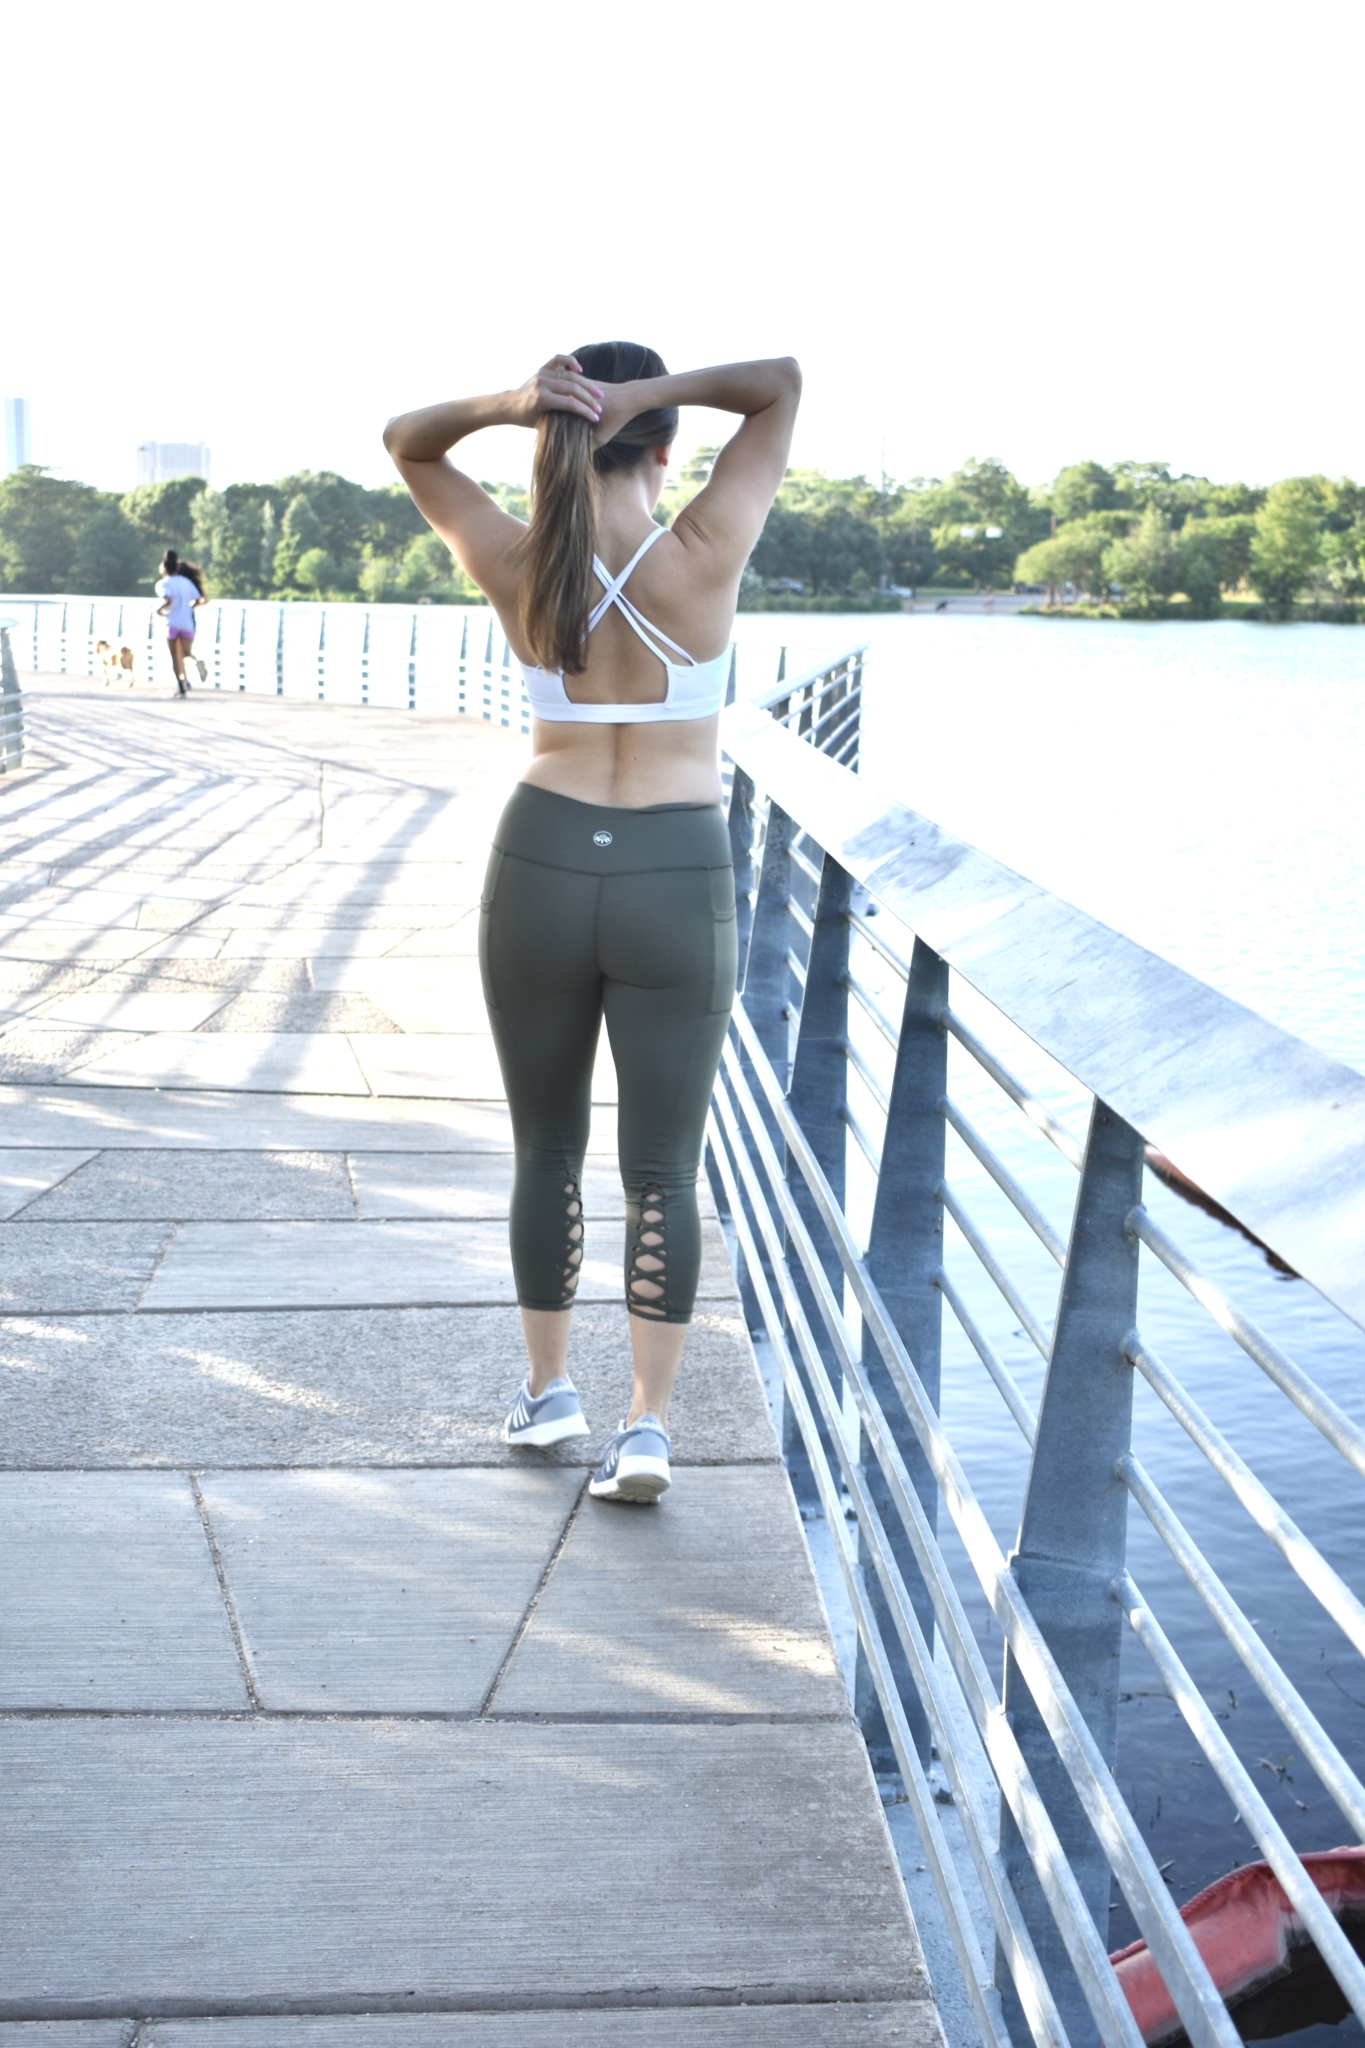 hunter green workout leggings with criss cross details, white sports bra and grey adidas running shoes